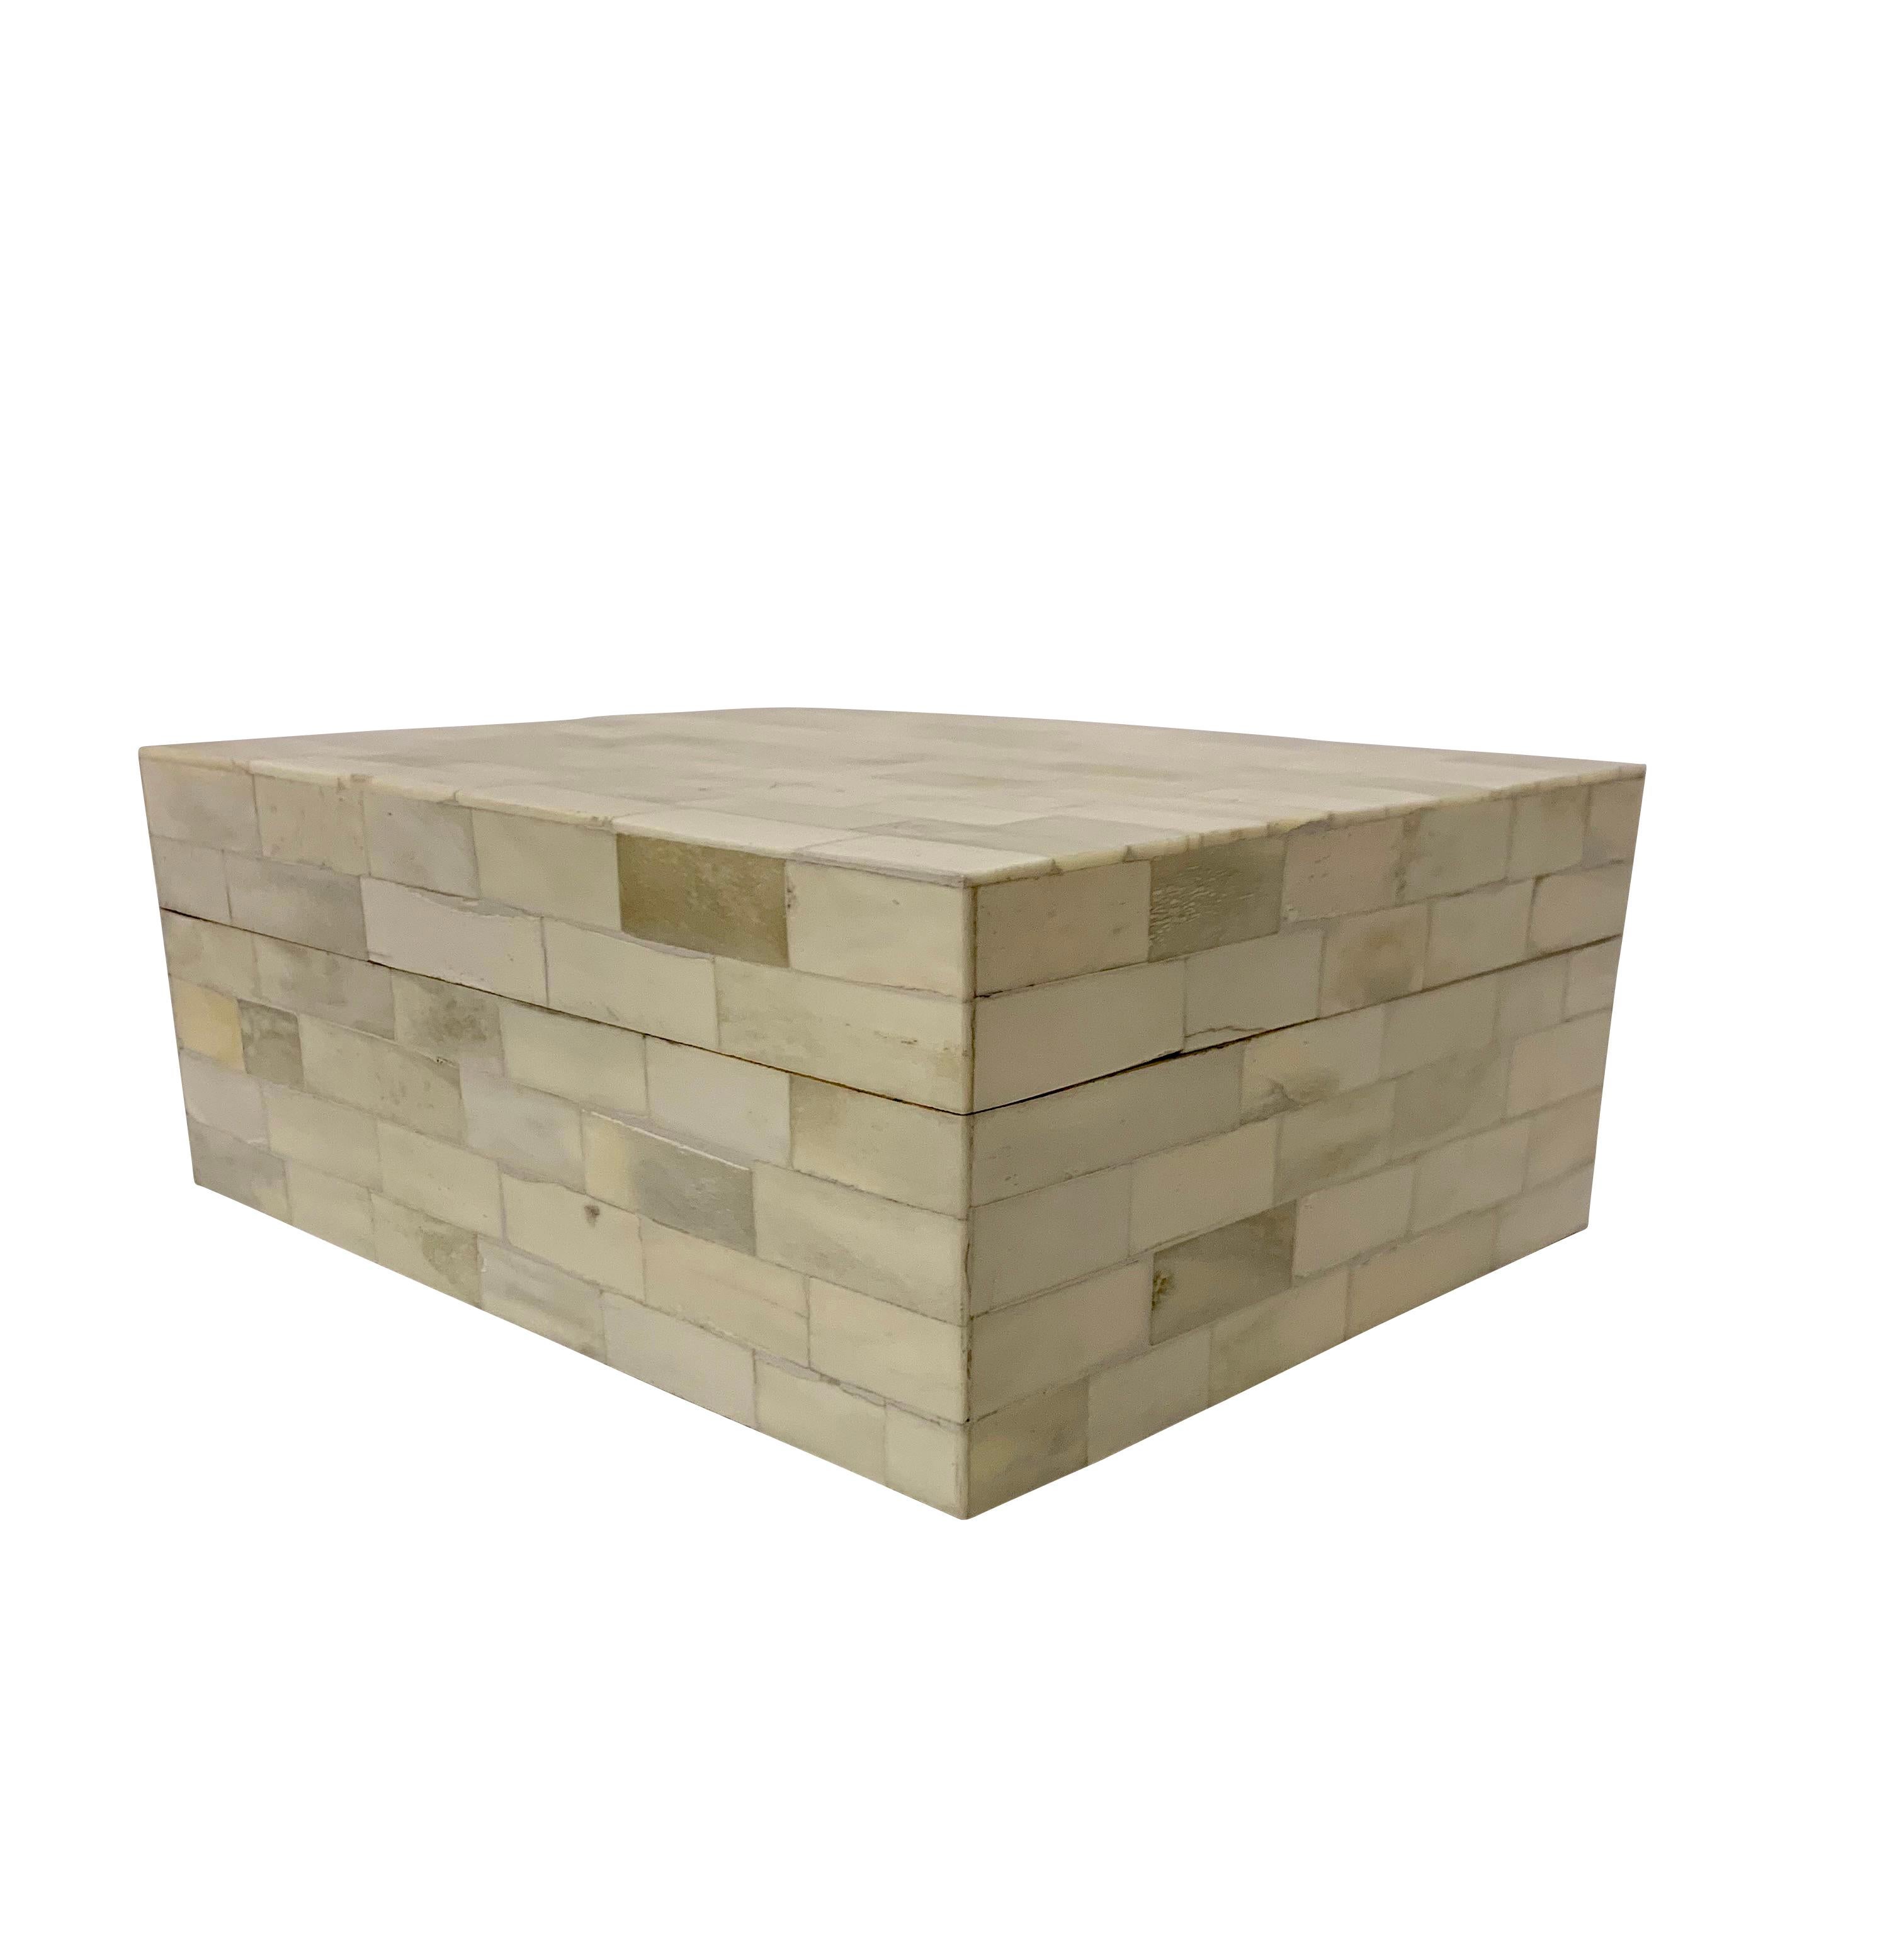 Contemporary Indian bone box with natural cream colored rectangular box design
Also available in a larger size ( S6531 ) as well as three sizes of trays ( S6539 / 6546 / S6547 )
Part of a large collection of bone boxes.